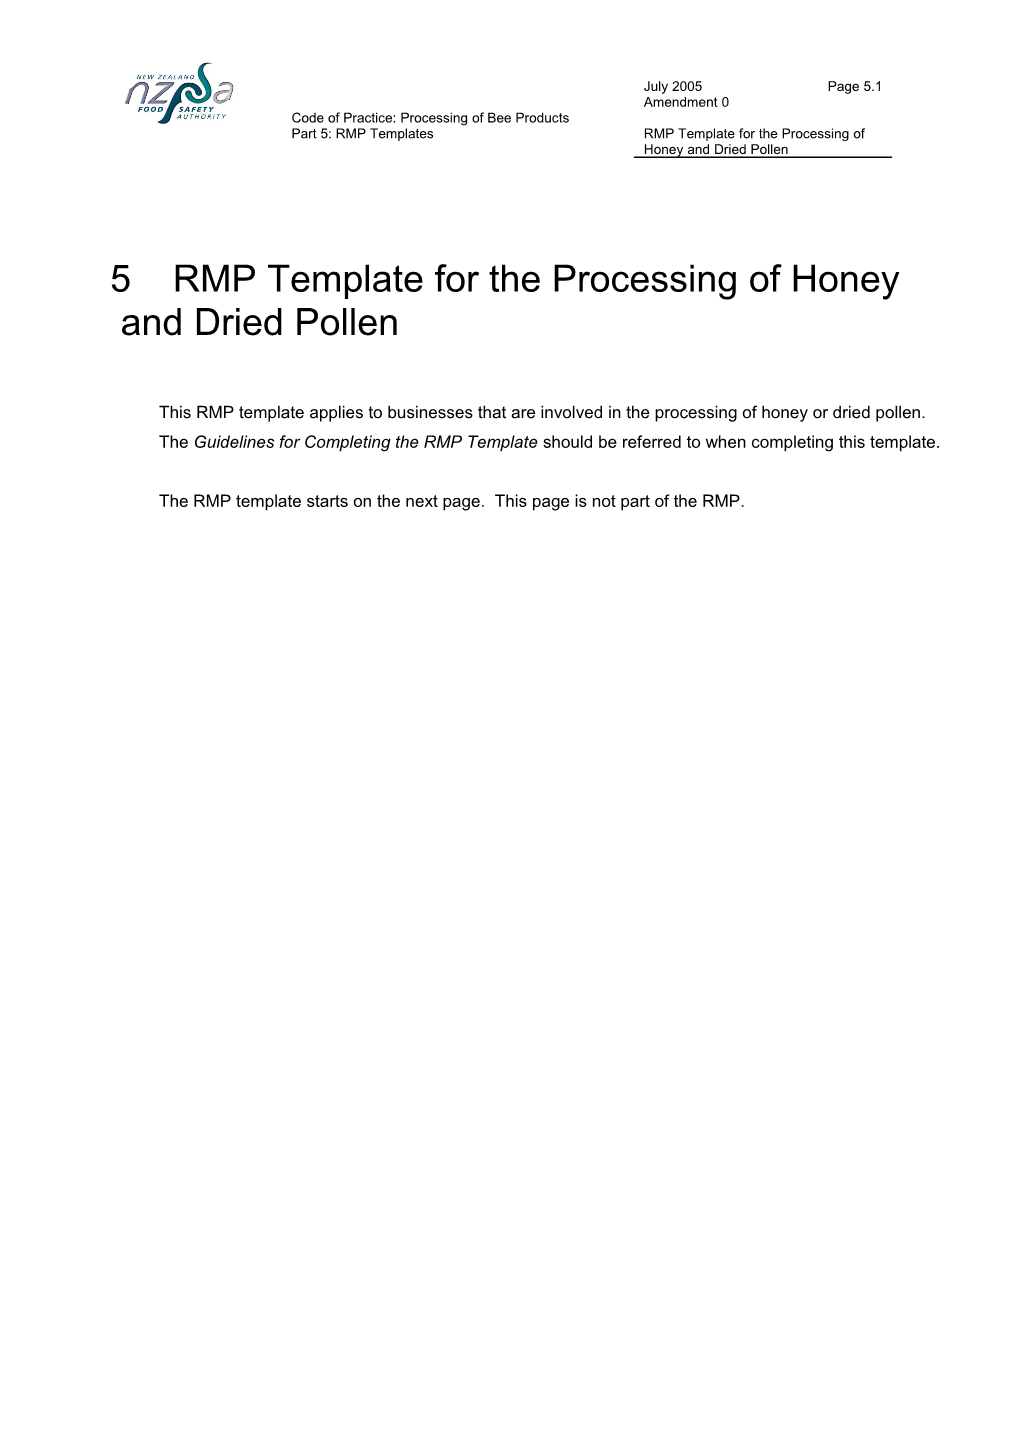 RMP Template for the Processing of Honey and Dried Pollen